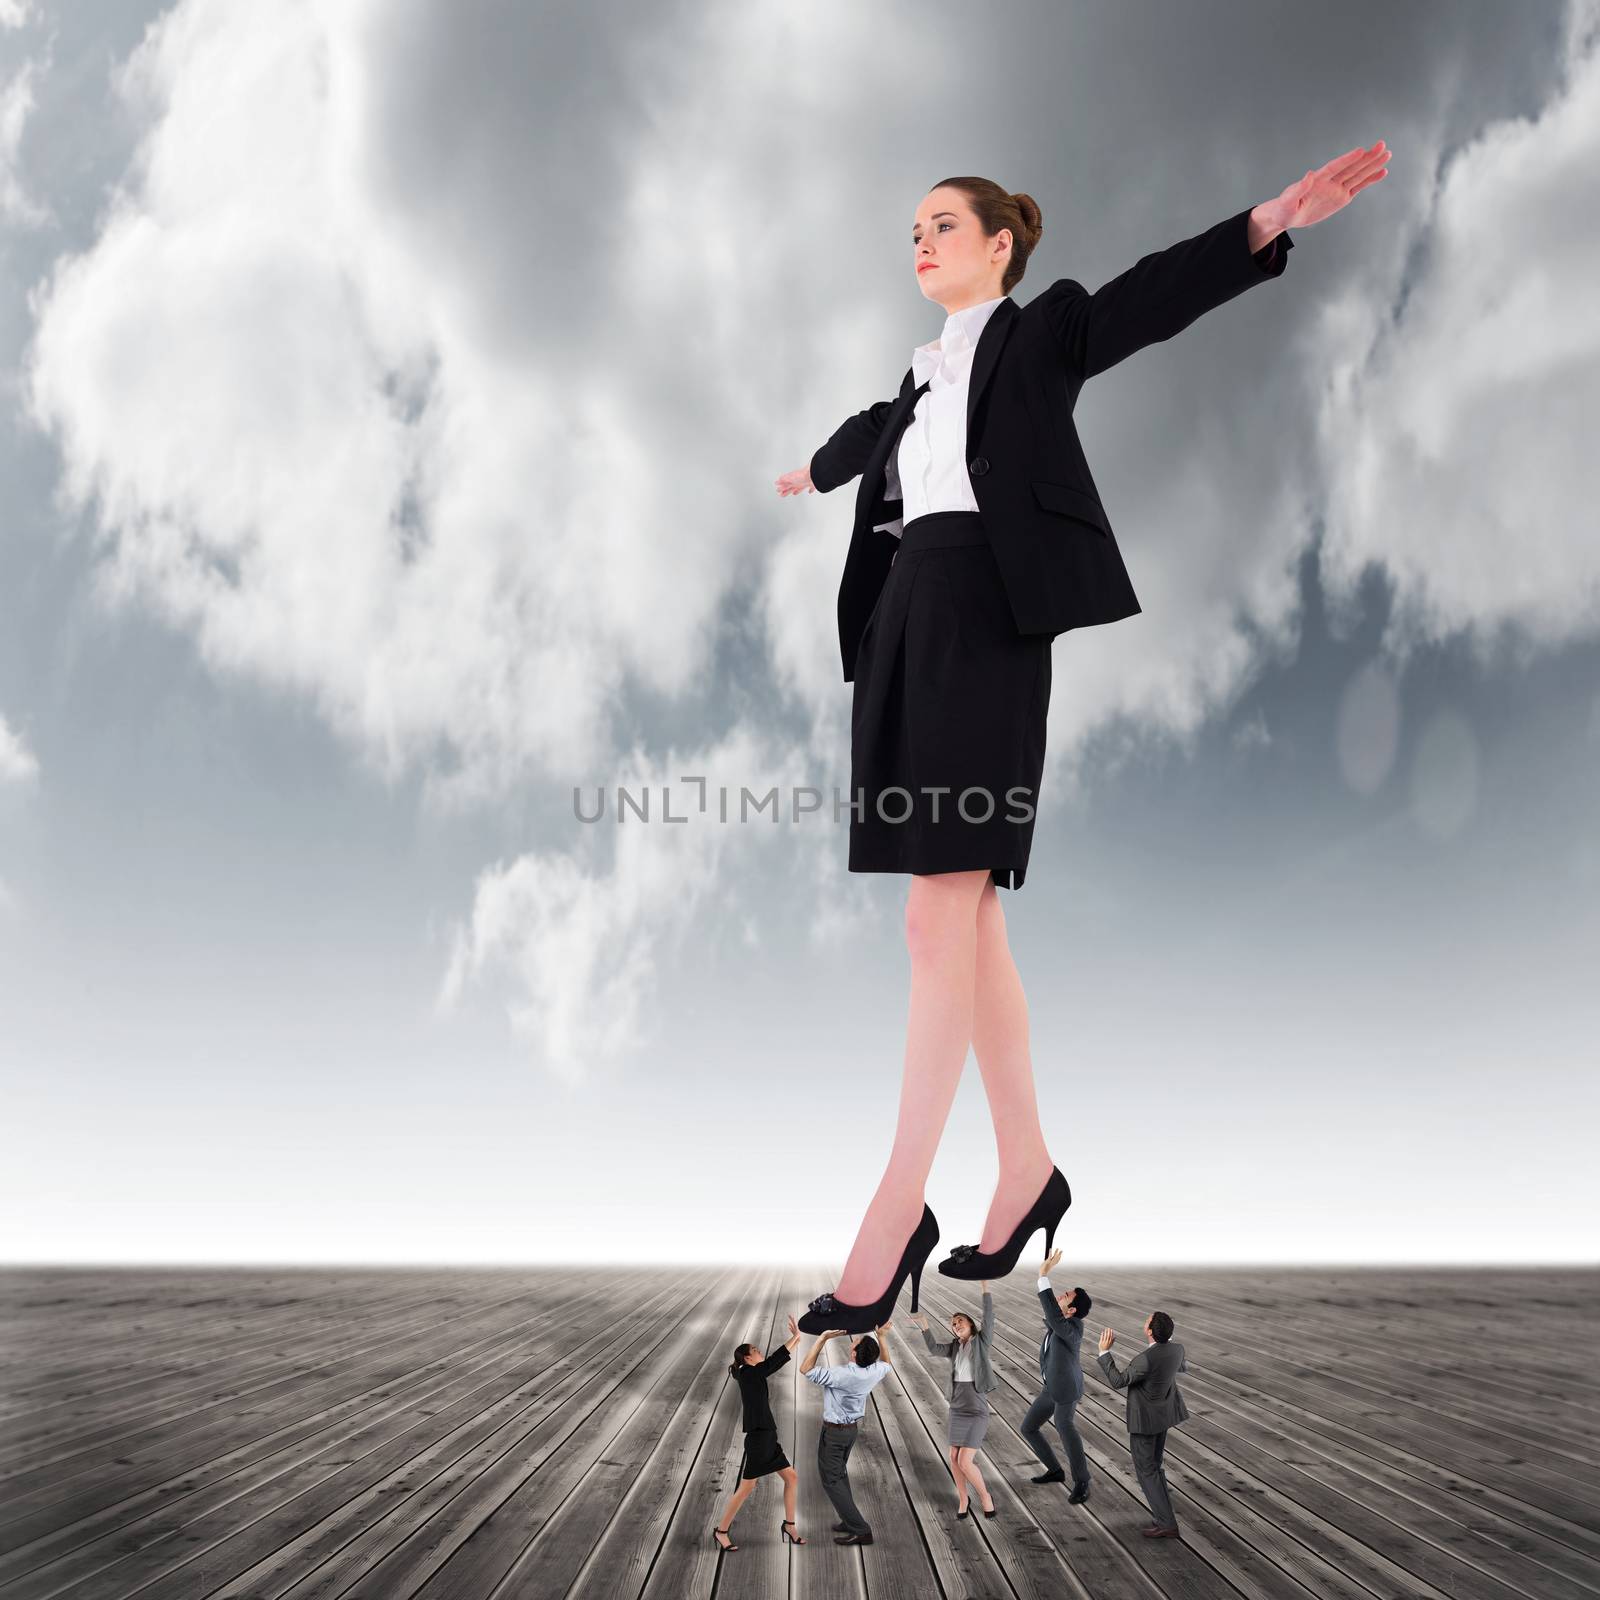 Composite image of business team supporting boss against cloudy sky background